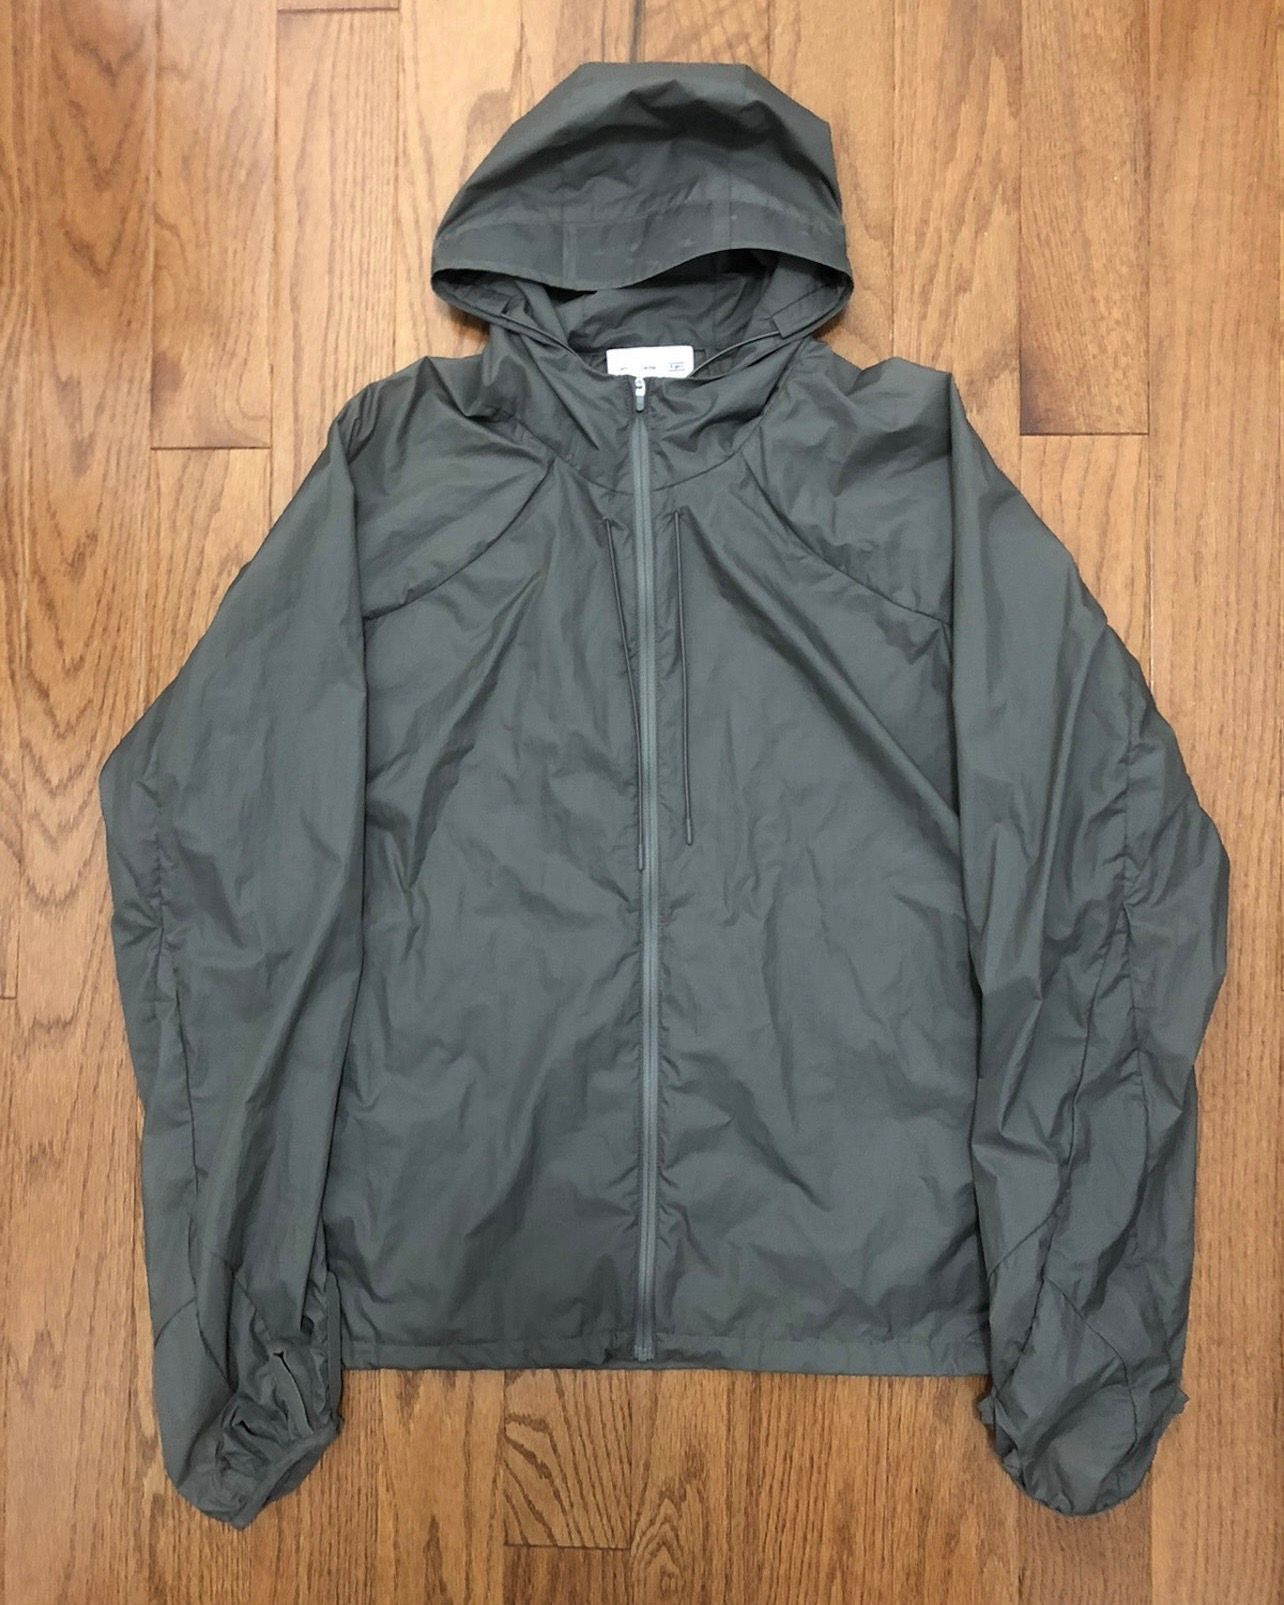 Pre-owned Post Archive Faction Paf 4.0 Technical Jacket Right (charcoal)